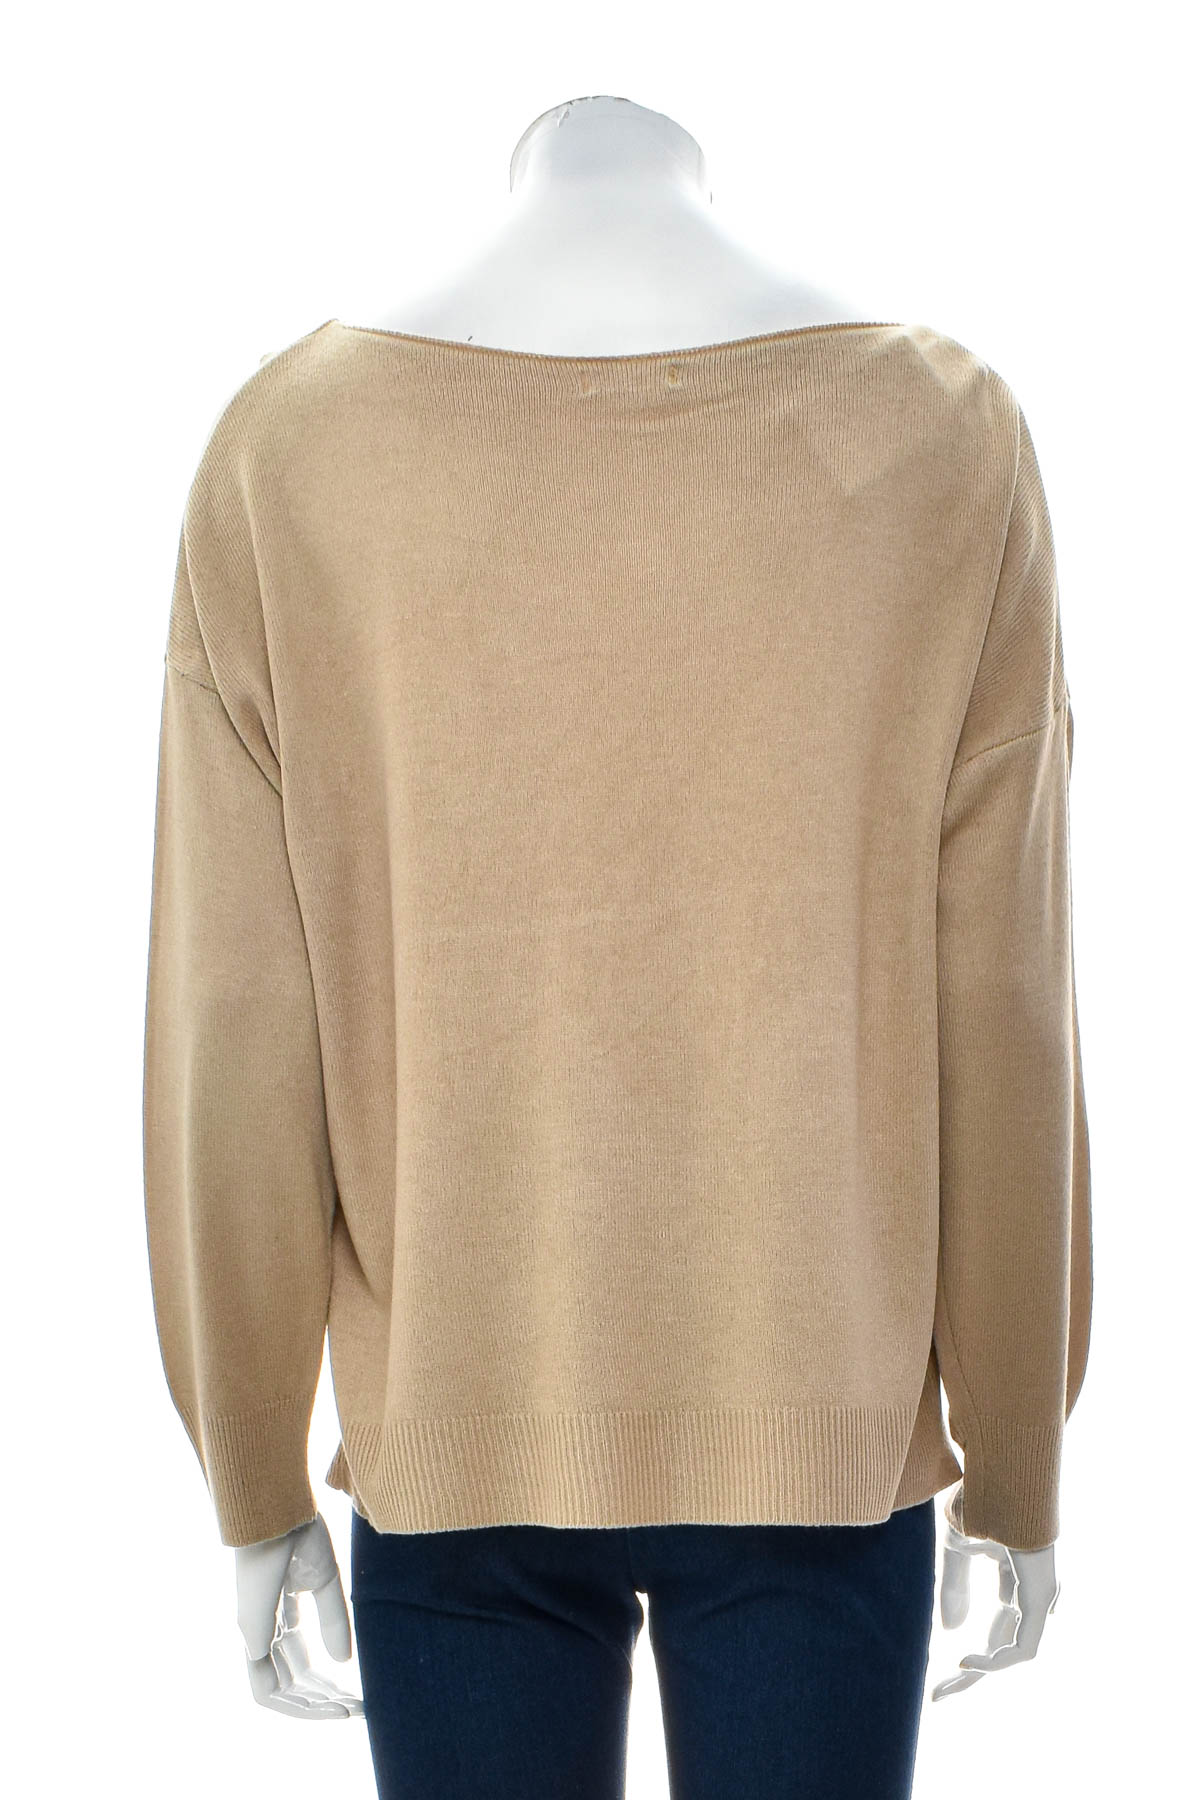 Women's sweater - Made in Italy - 1